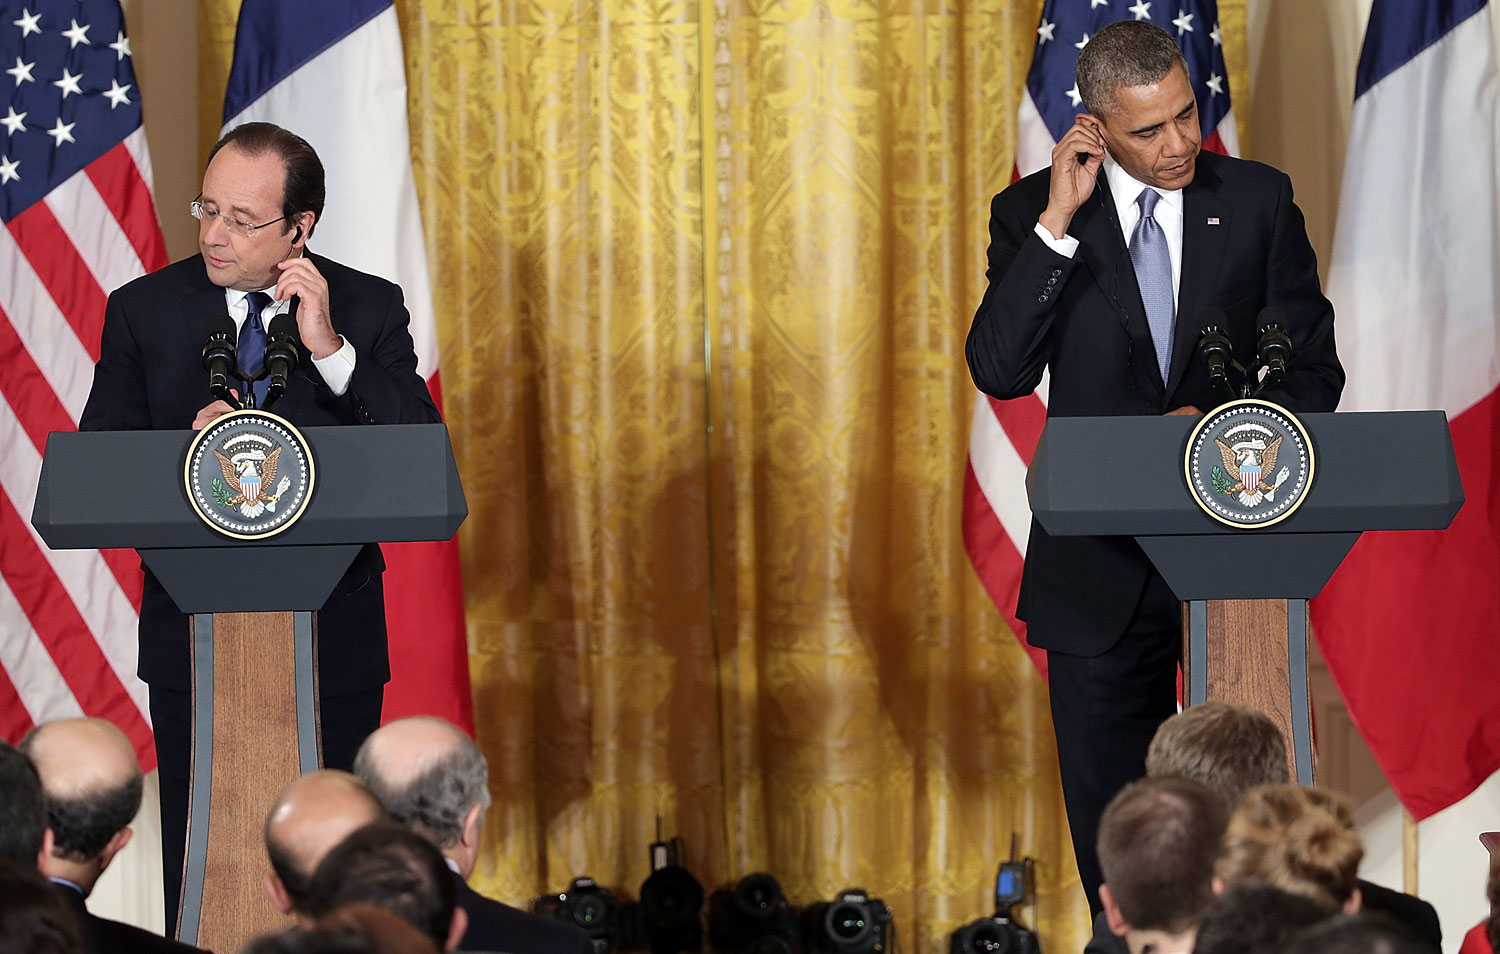 President Barack Obama and French President Francois Hollande arrive for a joint press conference in the East Room at the White House on Feb. 11, 2014 in Washington. (Chip Somodevilla—Getty Images)